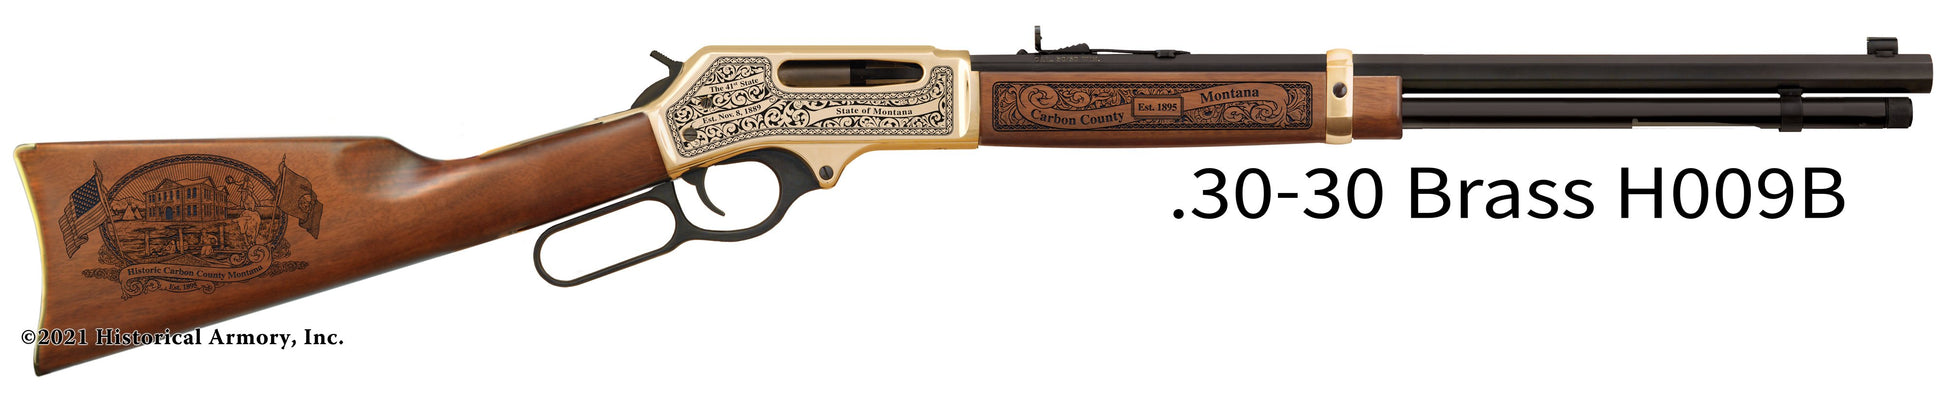 Carbon County Montana Engraved Henry .30-30 Rifle